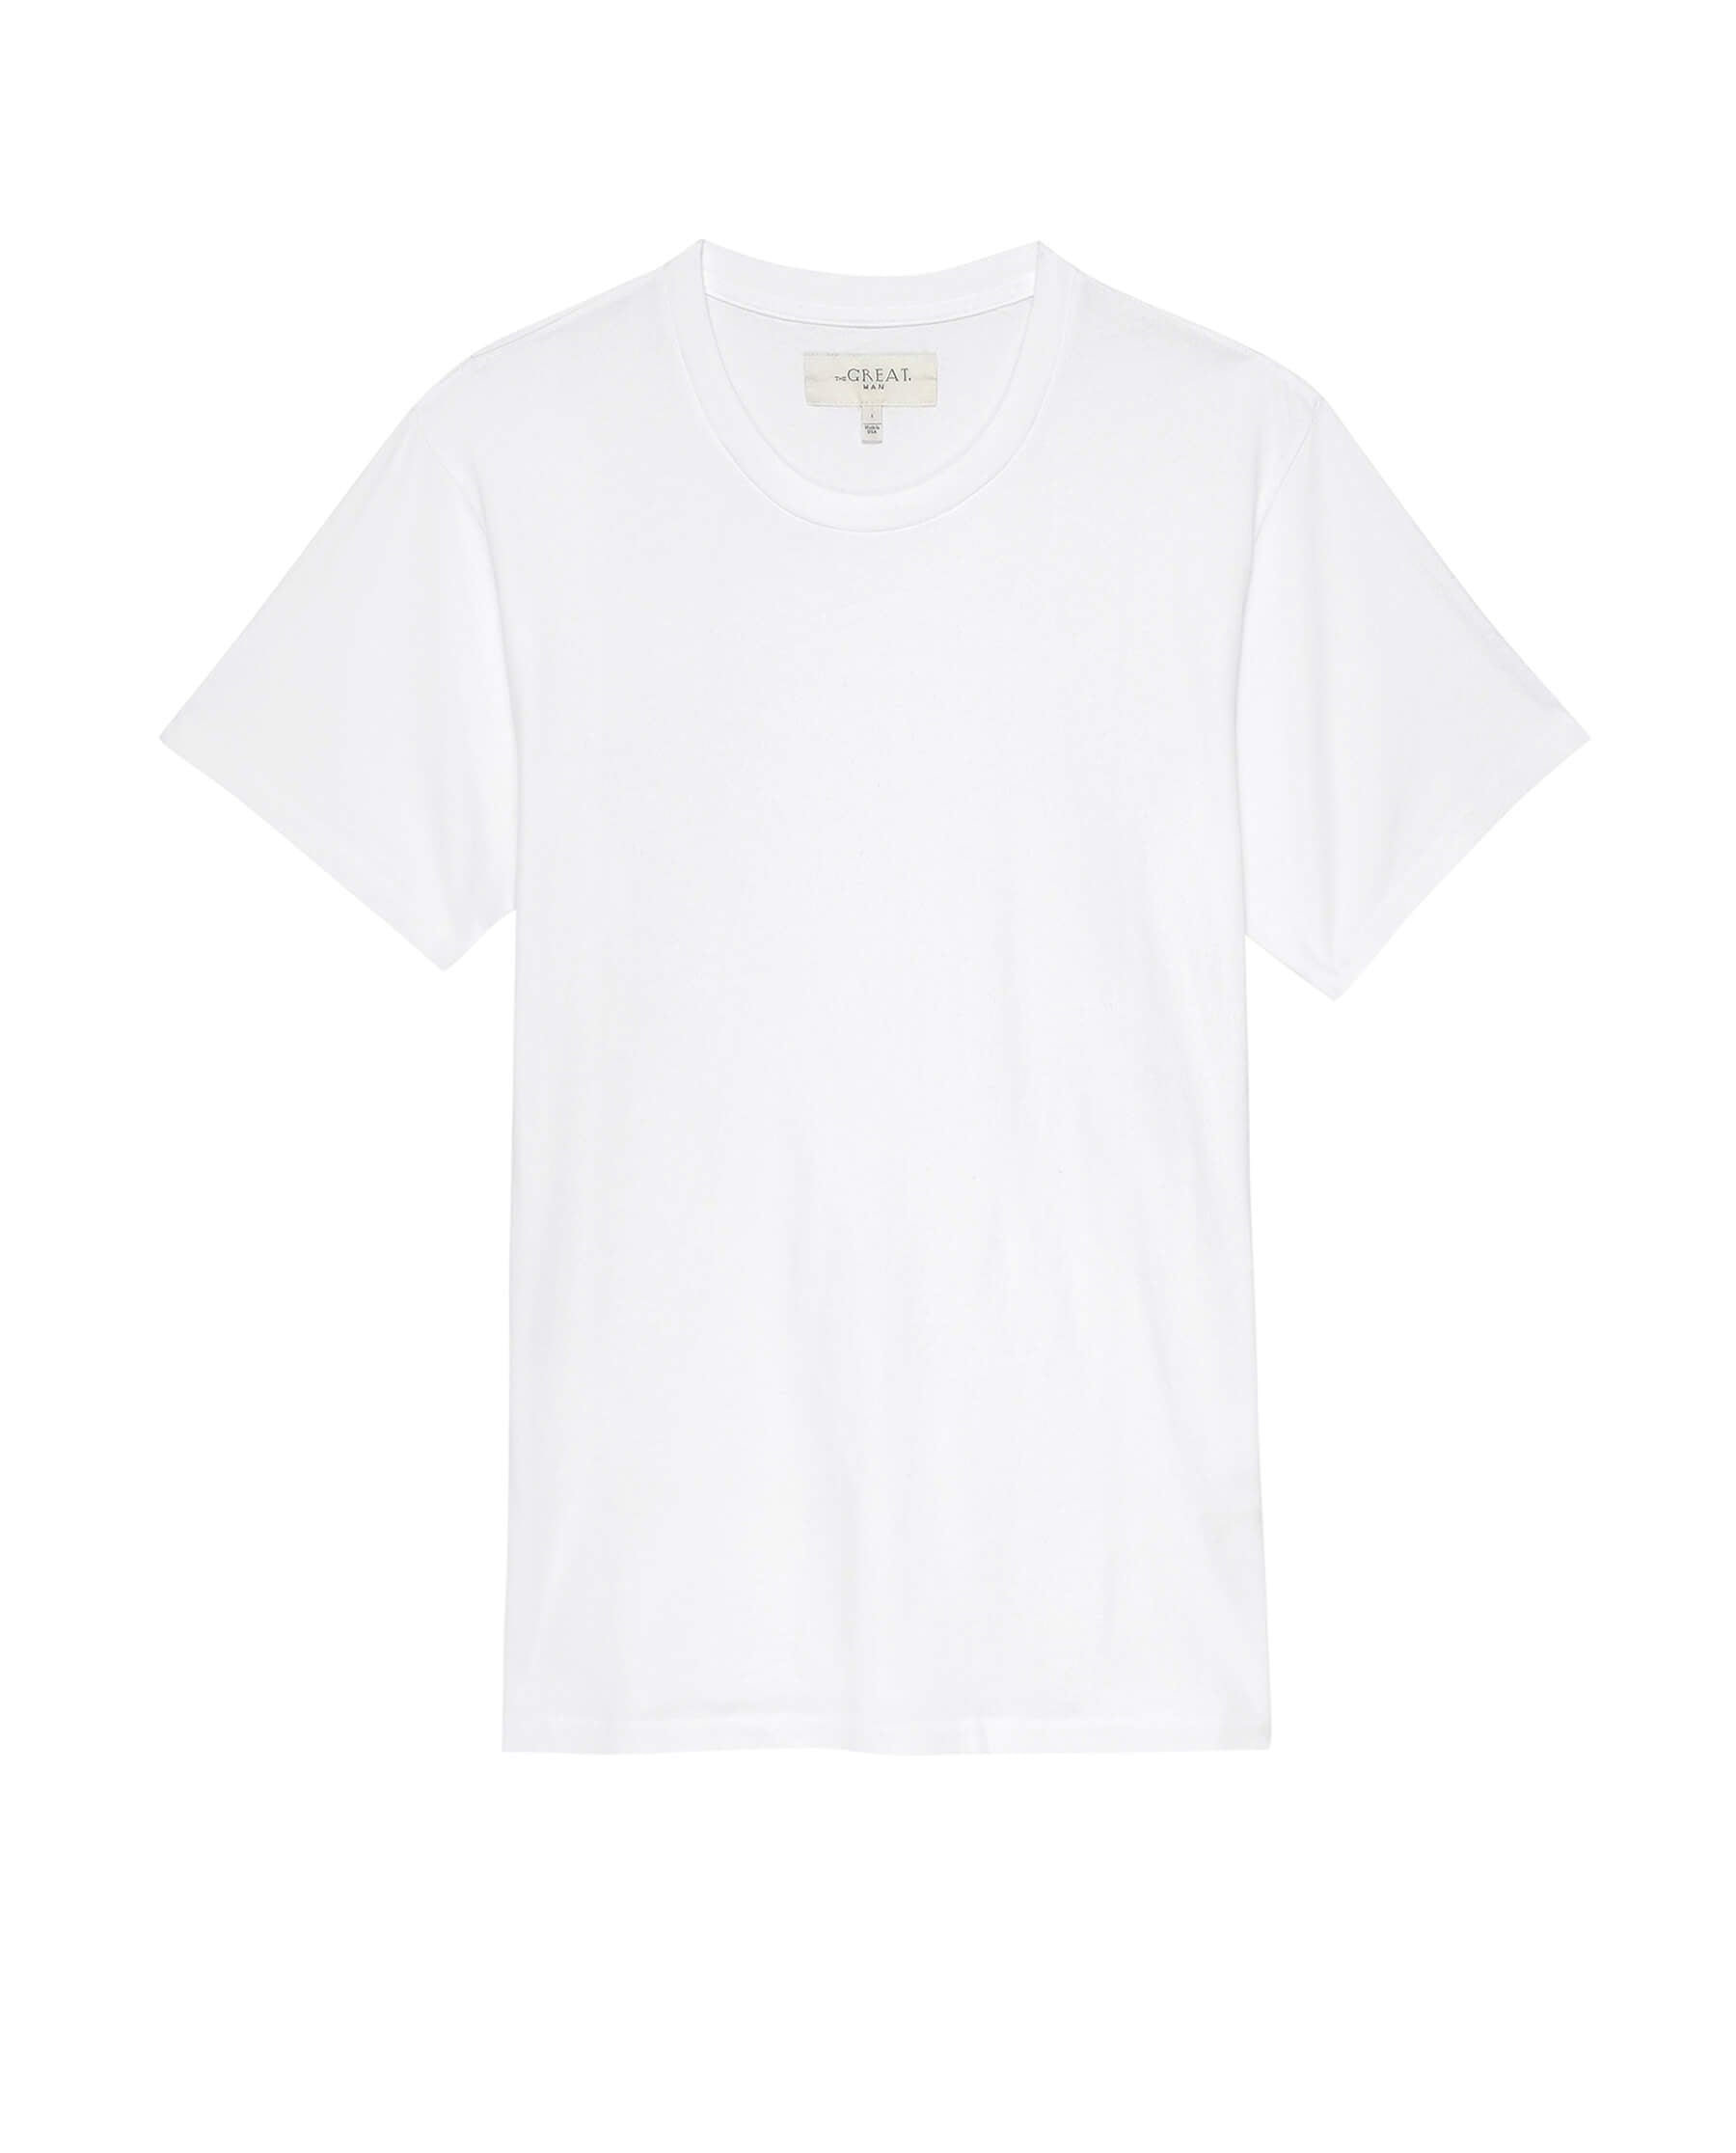 The Men's Boxy Crew. -- TRUE WHITE TEES THE GREAT. MAN